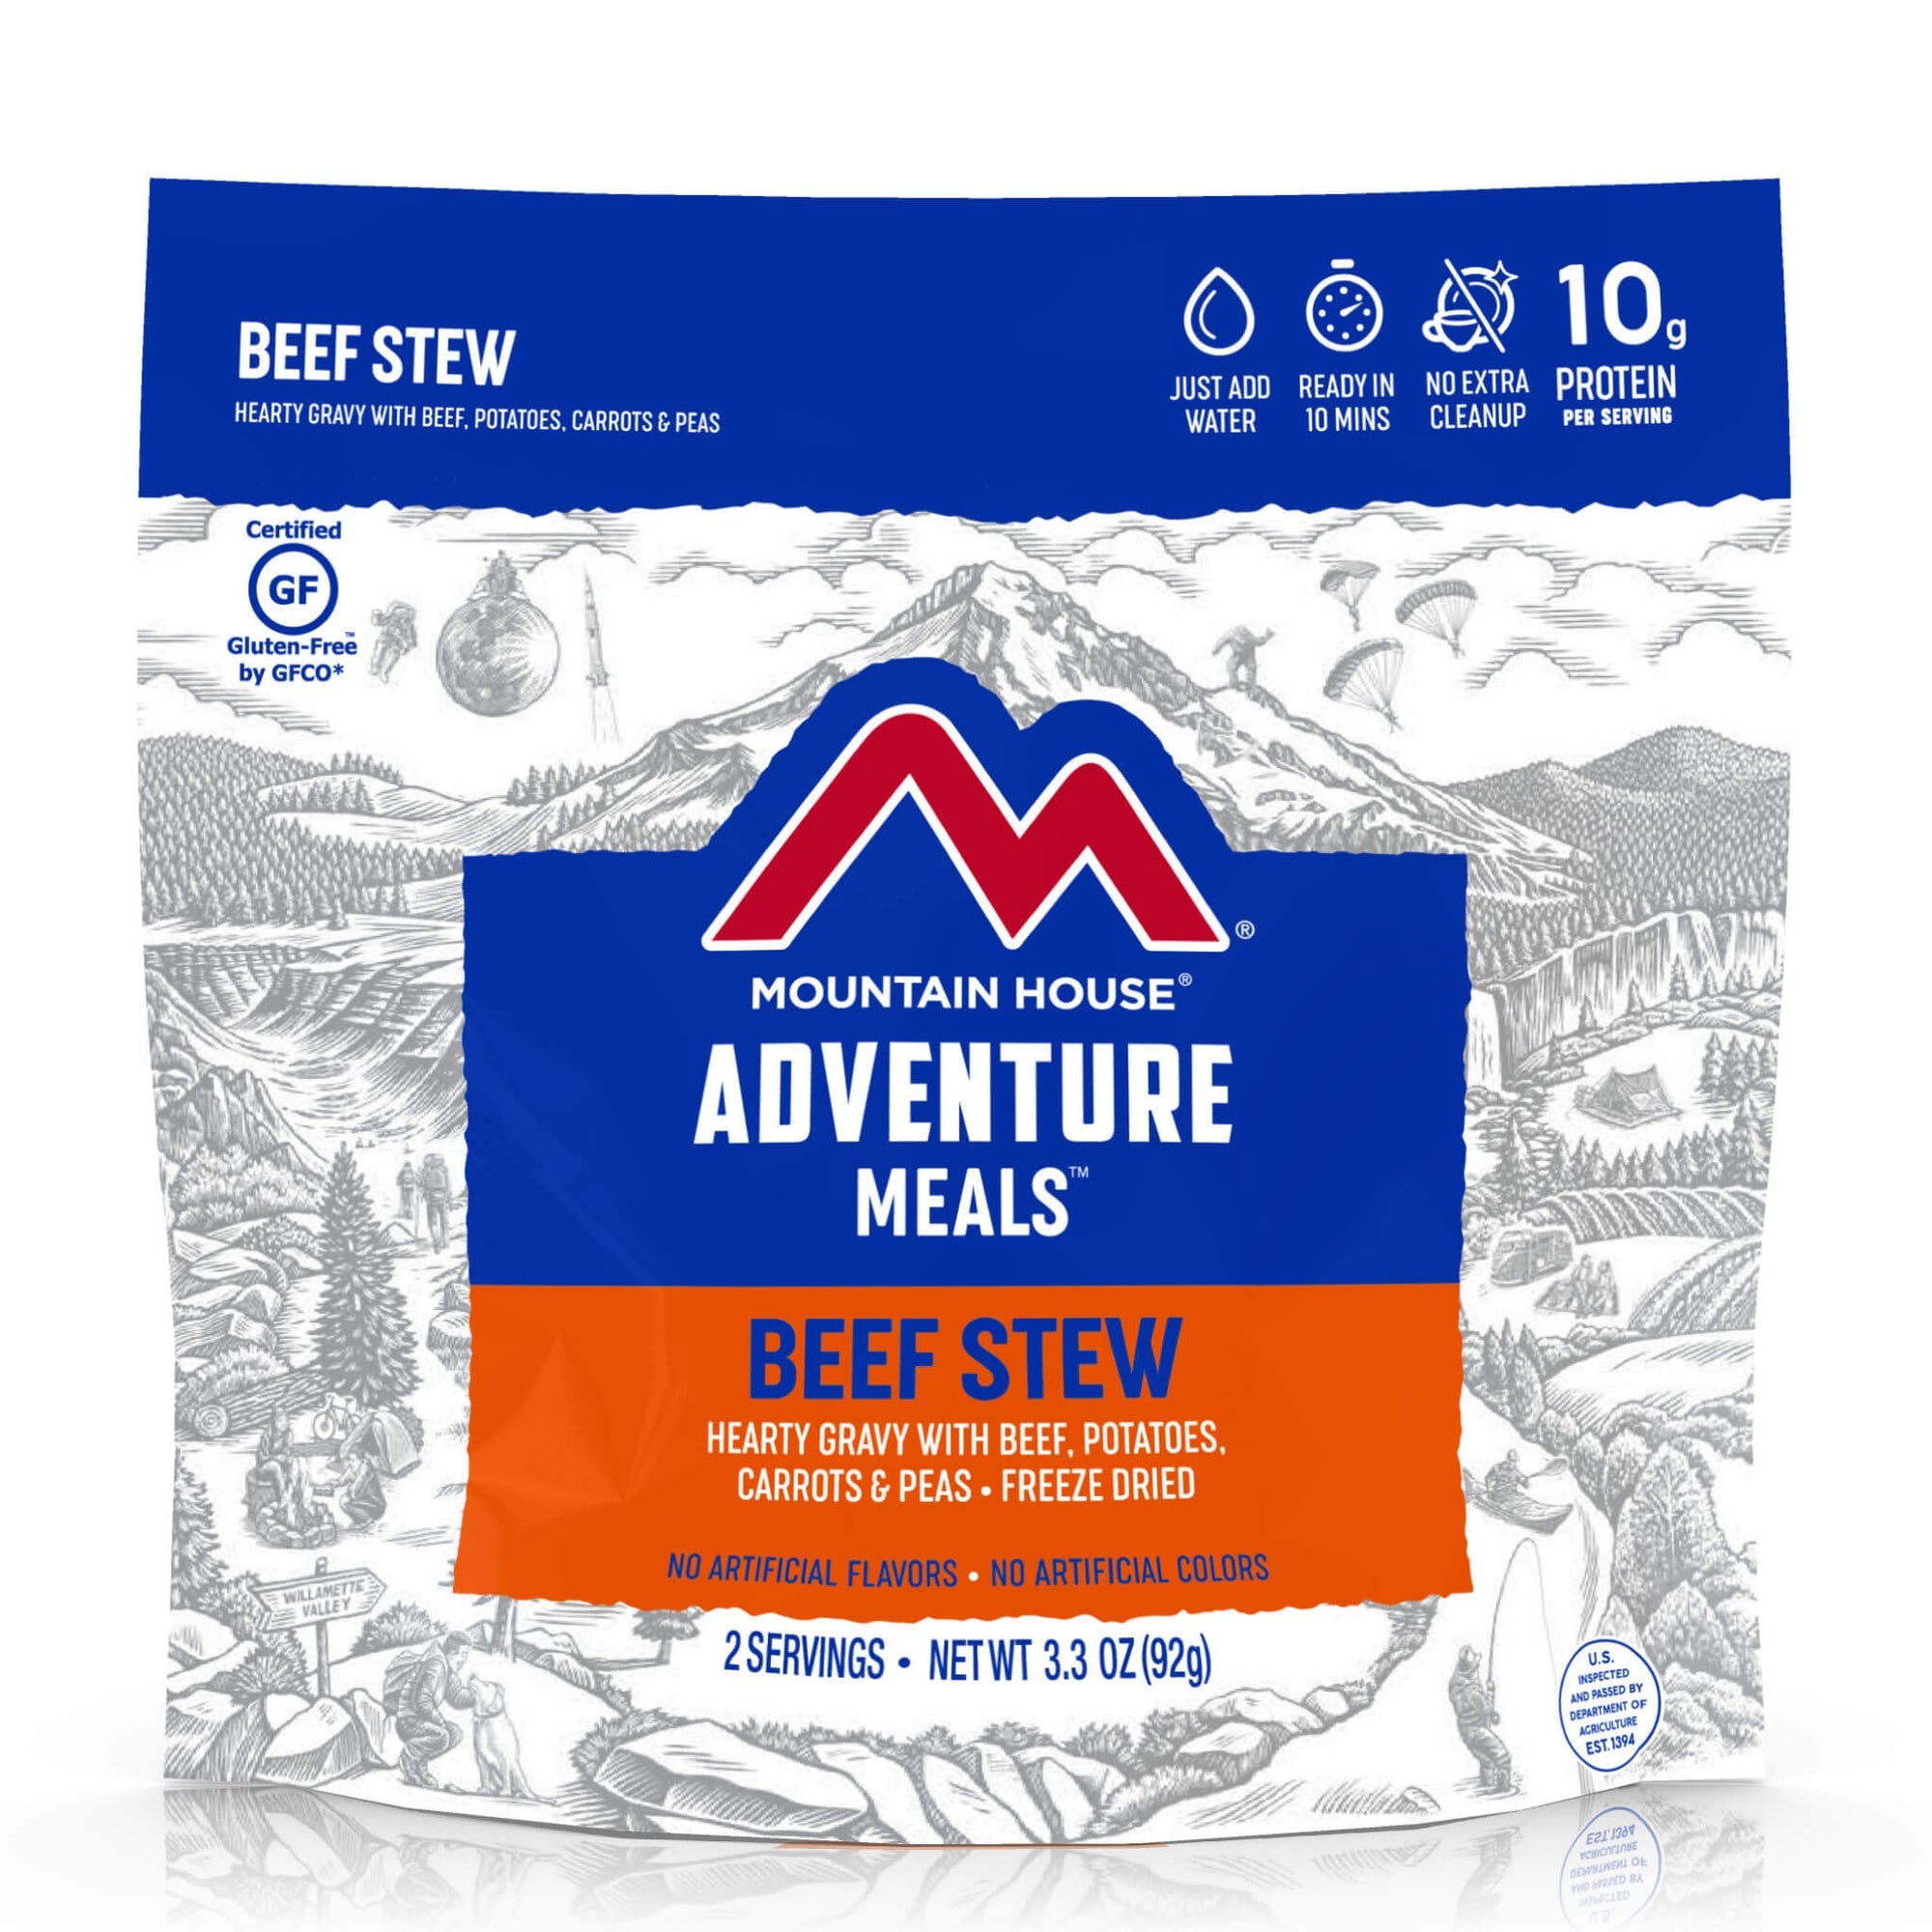 Mountain House Beef Stew - Gear For Adventure